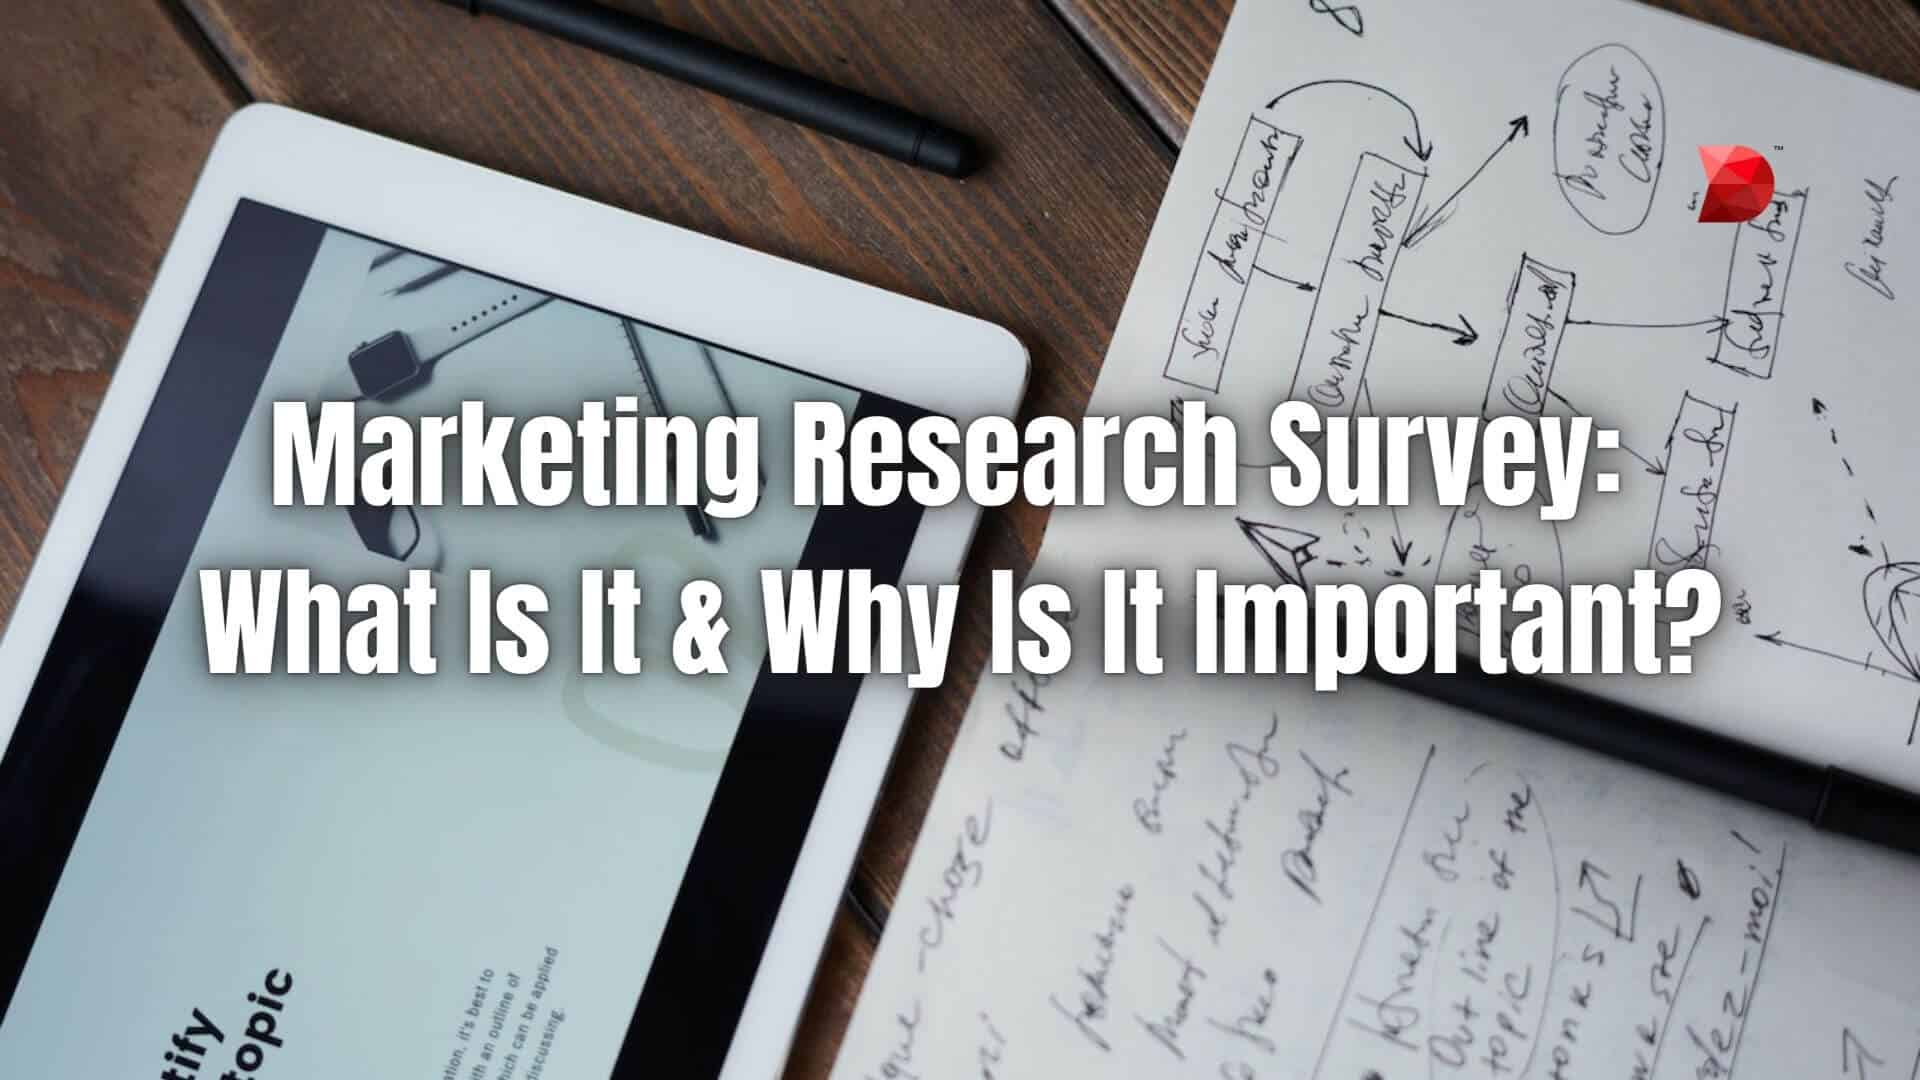 Marketing Research Survey What Is It & Why Is It Important